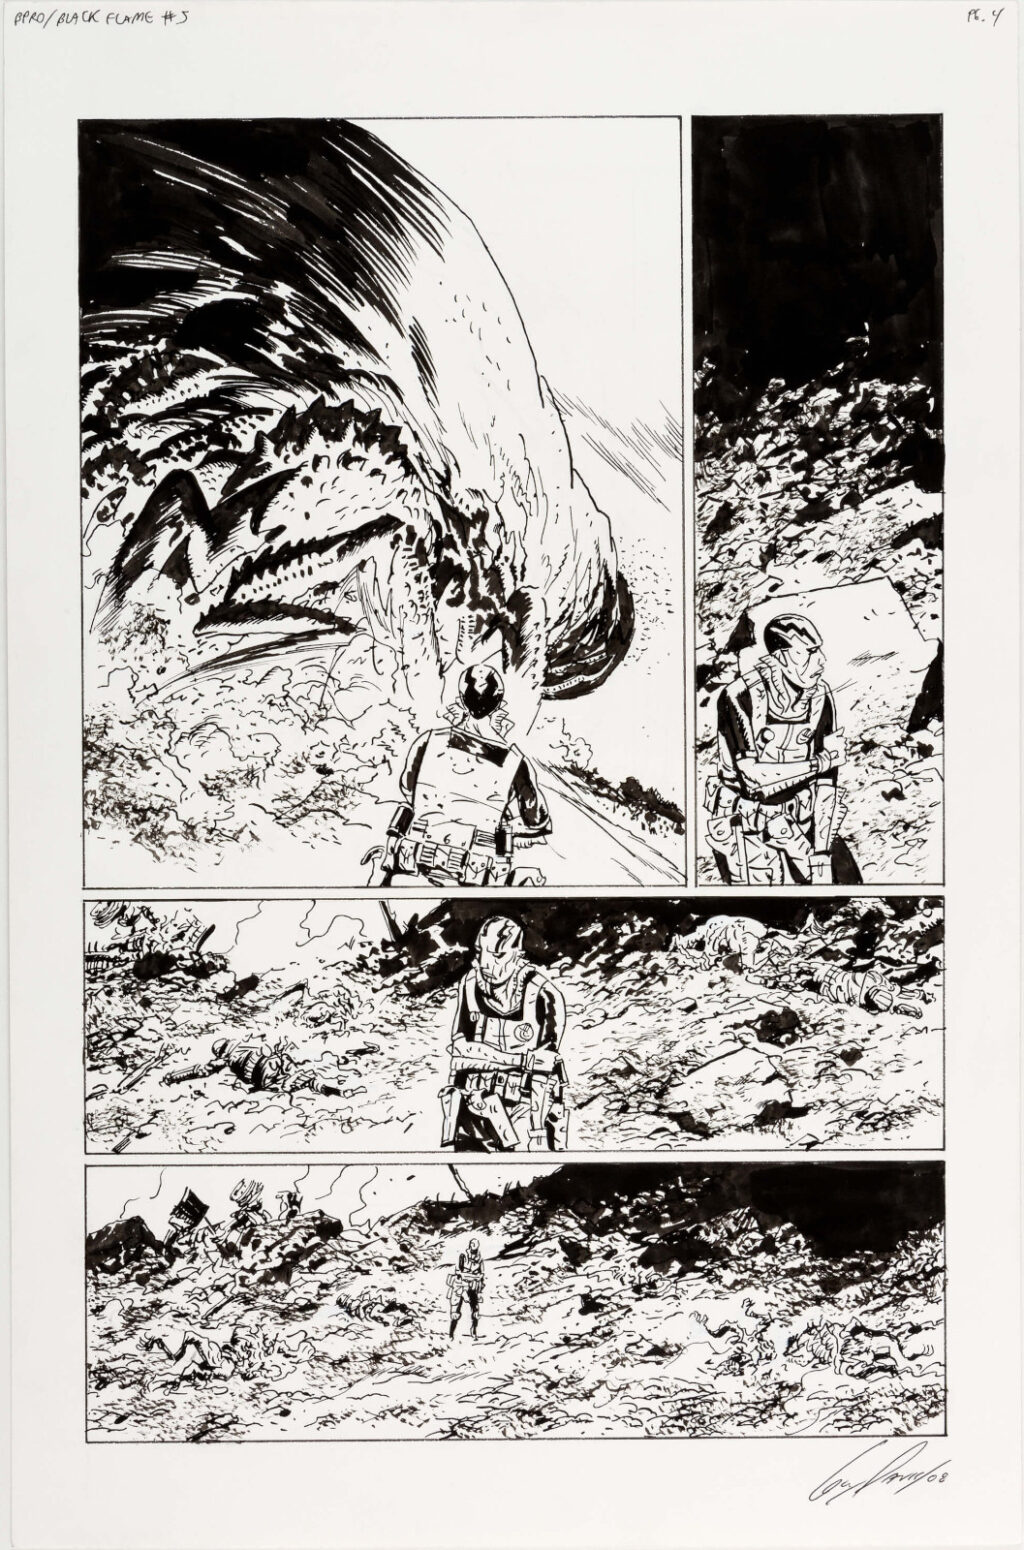 B.P.R.D. The Black Flame issue 5 page by Guy Davis